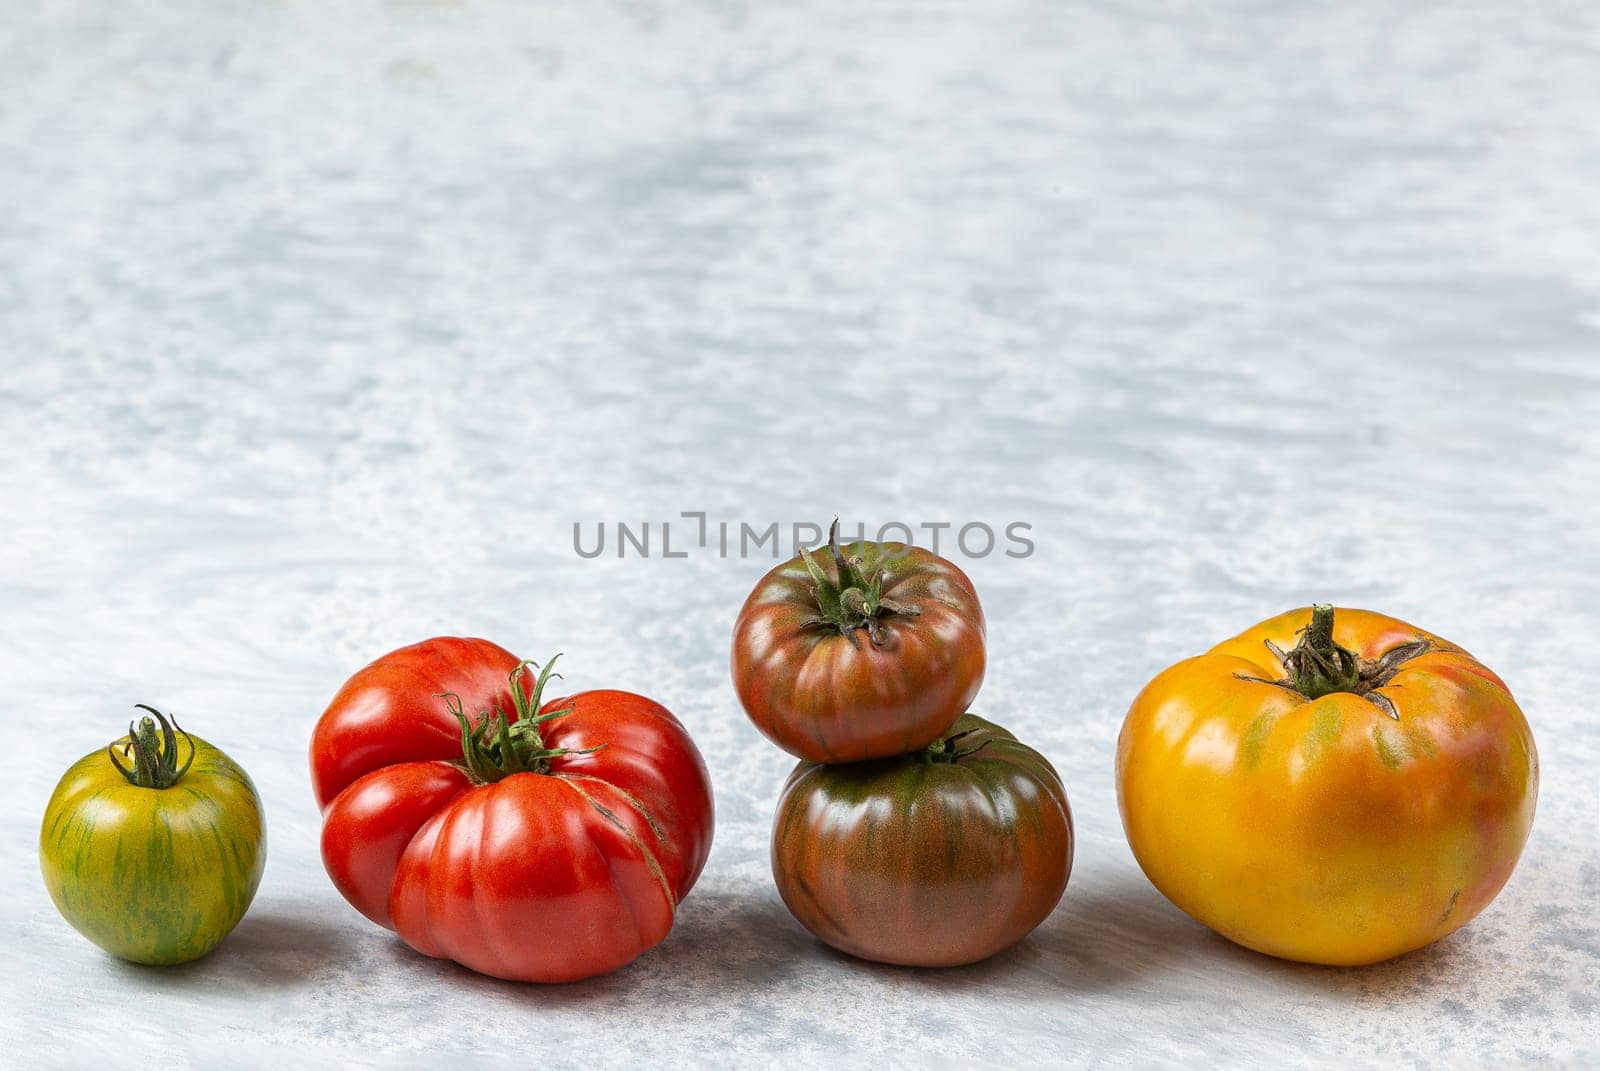 Line of freshly harvested heirloom and heritage tomatoes over marble background by JPC-PROD